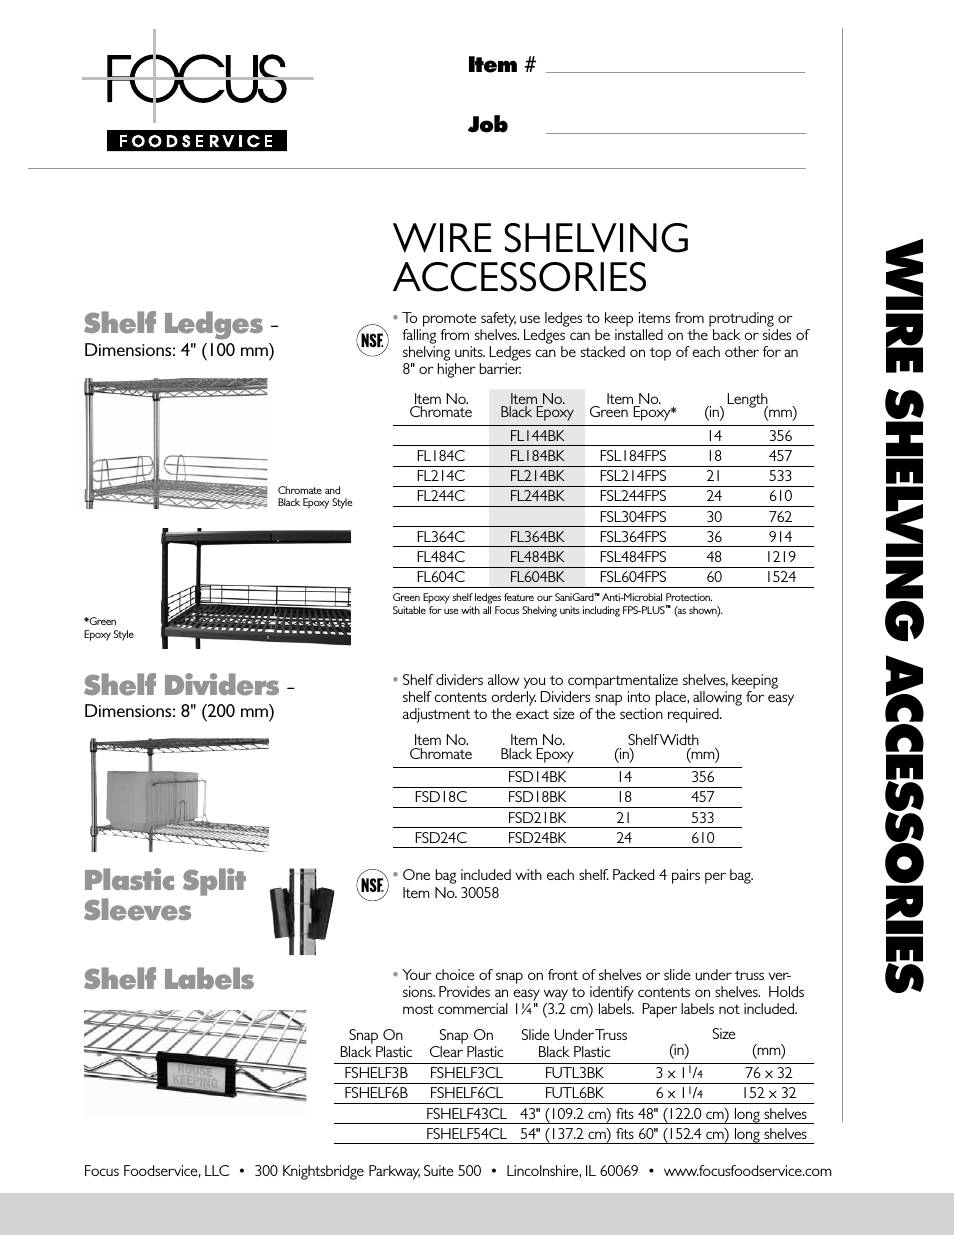 Shelving AcceSSorieS - Specification Sheets